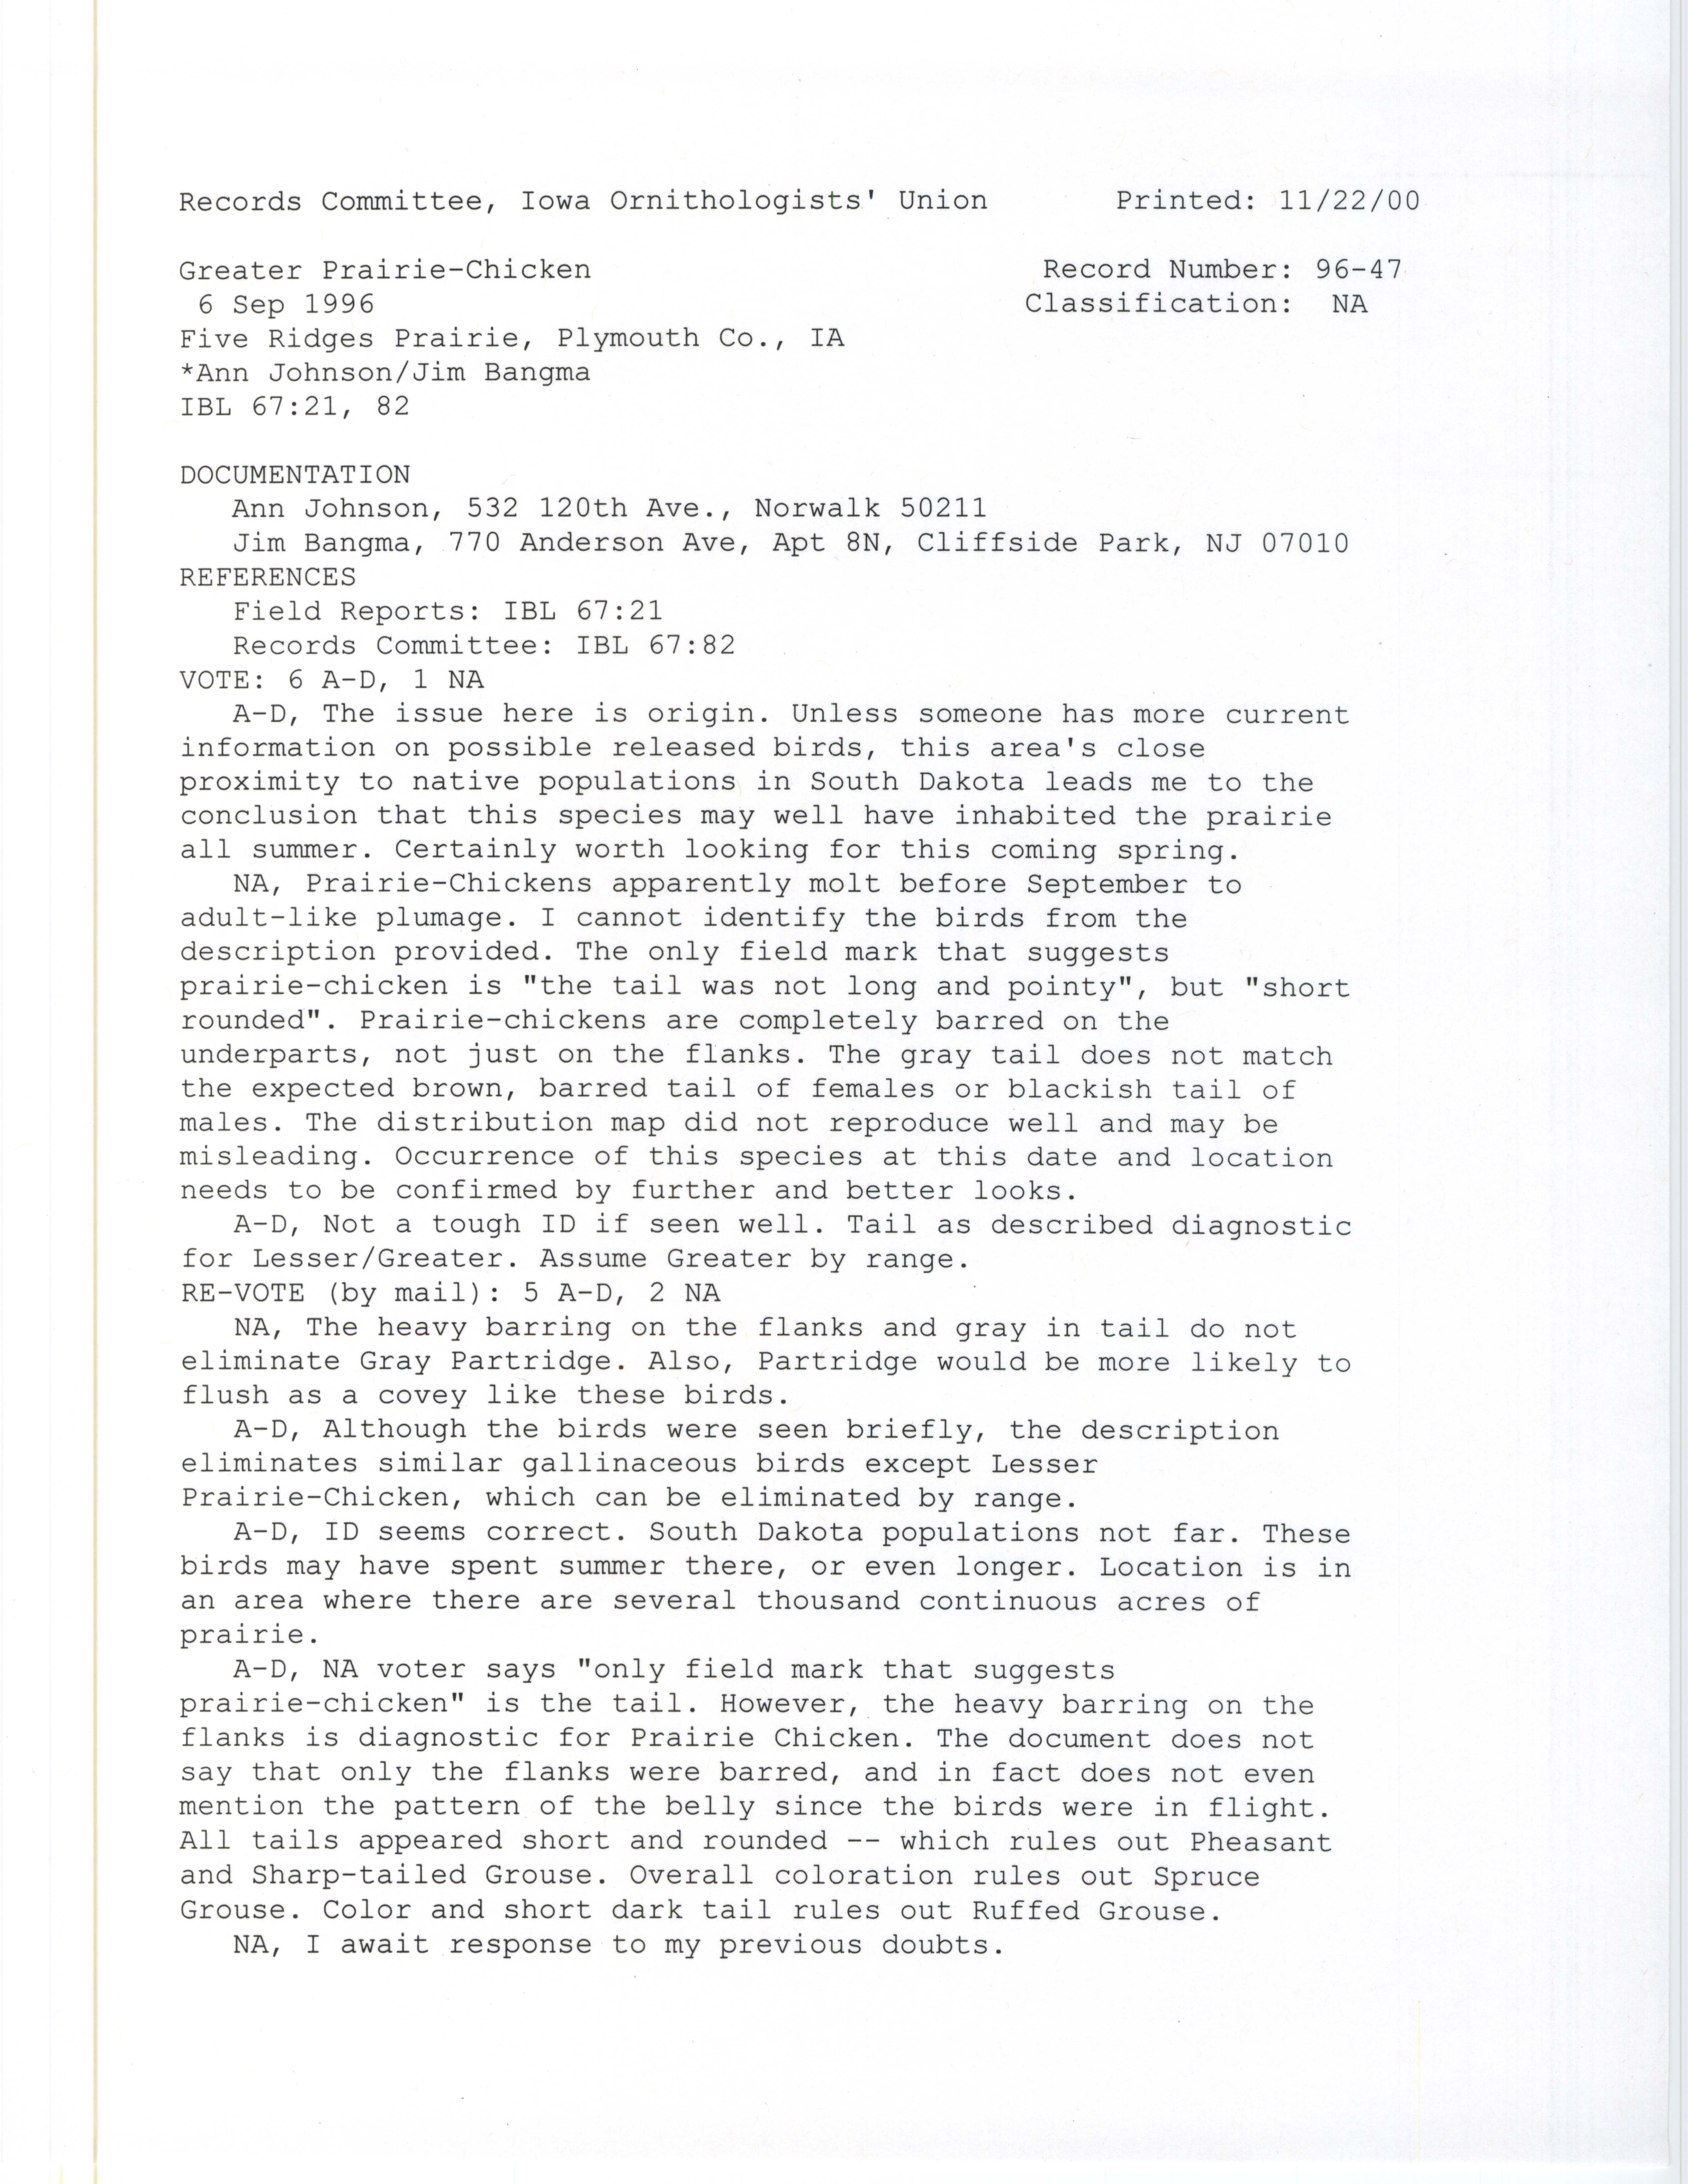 Records Committee review for rare bird sighting of Greater Prairie-Chicken at Five Ridges Prairie, 1996